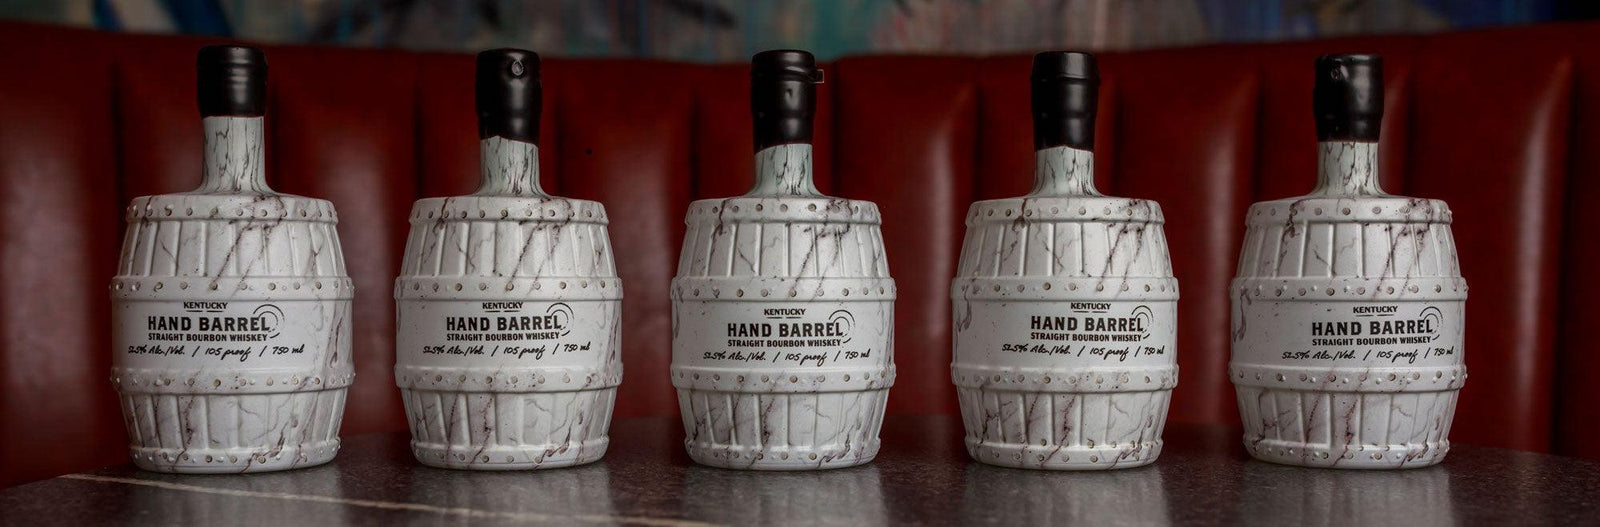 Kentucky Hand Barrel Straight Bourbon Whiskey: A Taste of Authenticity - The Barrel Tap